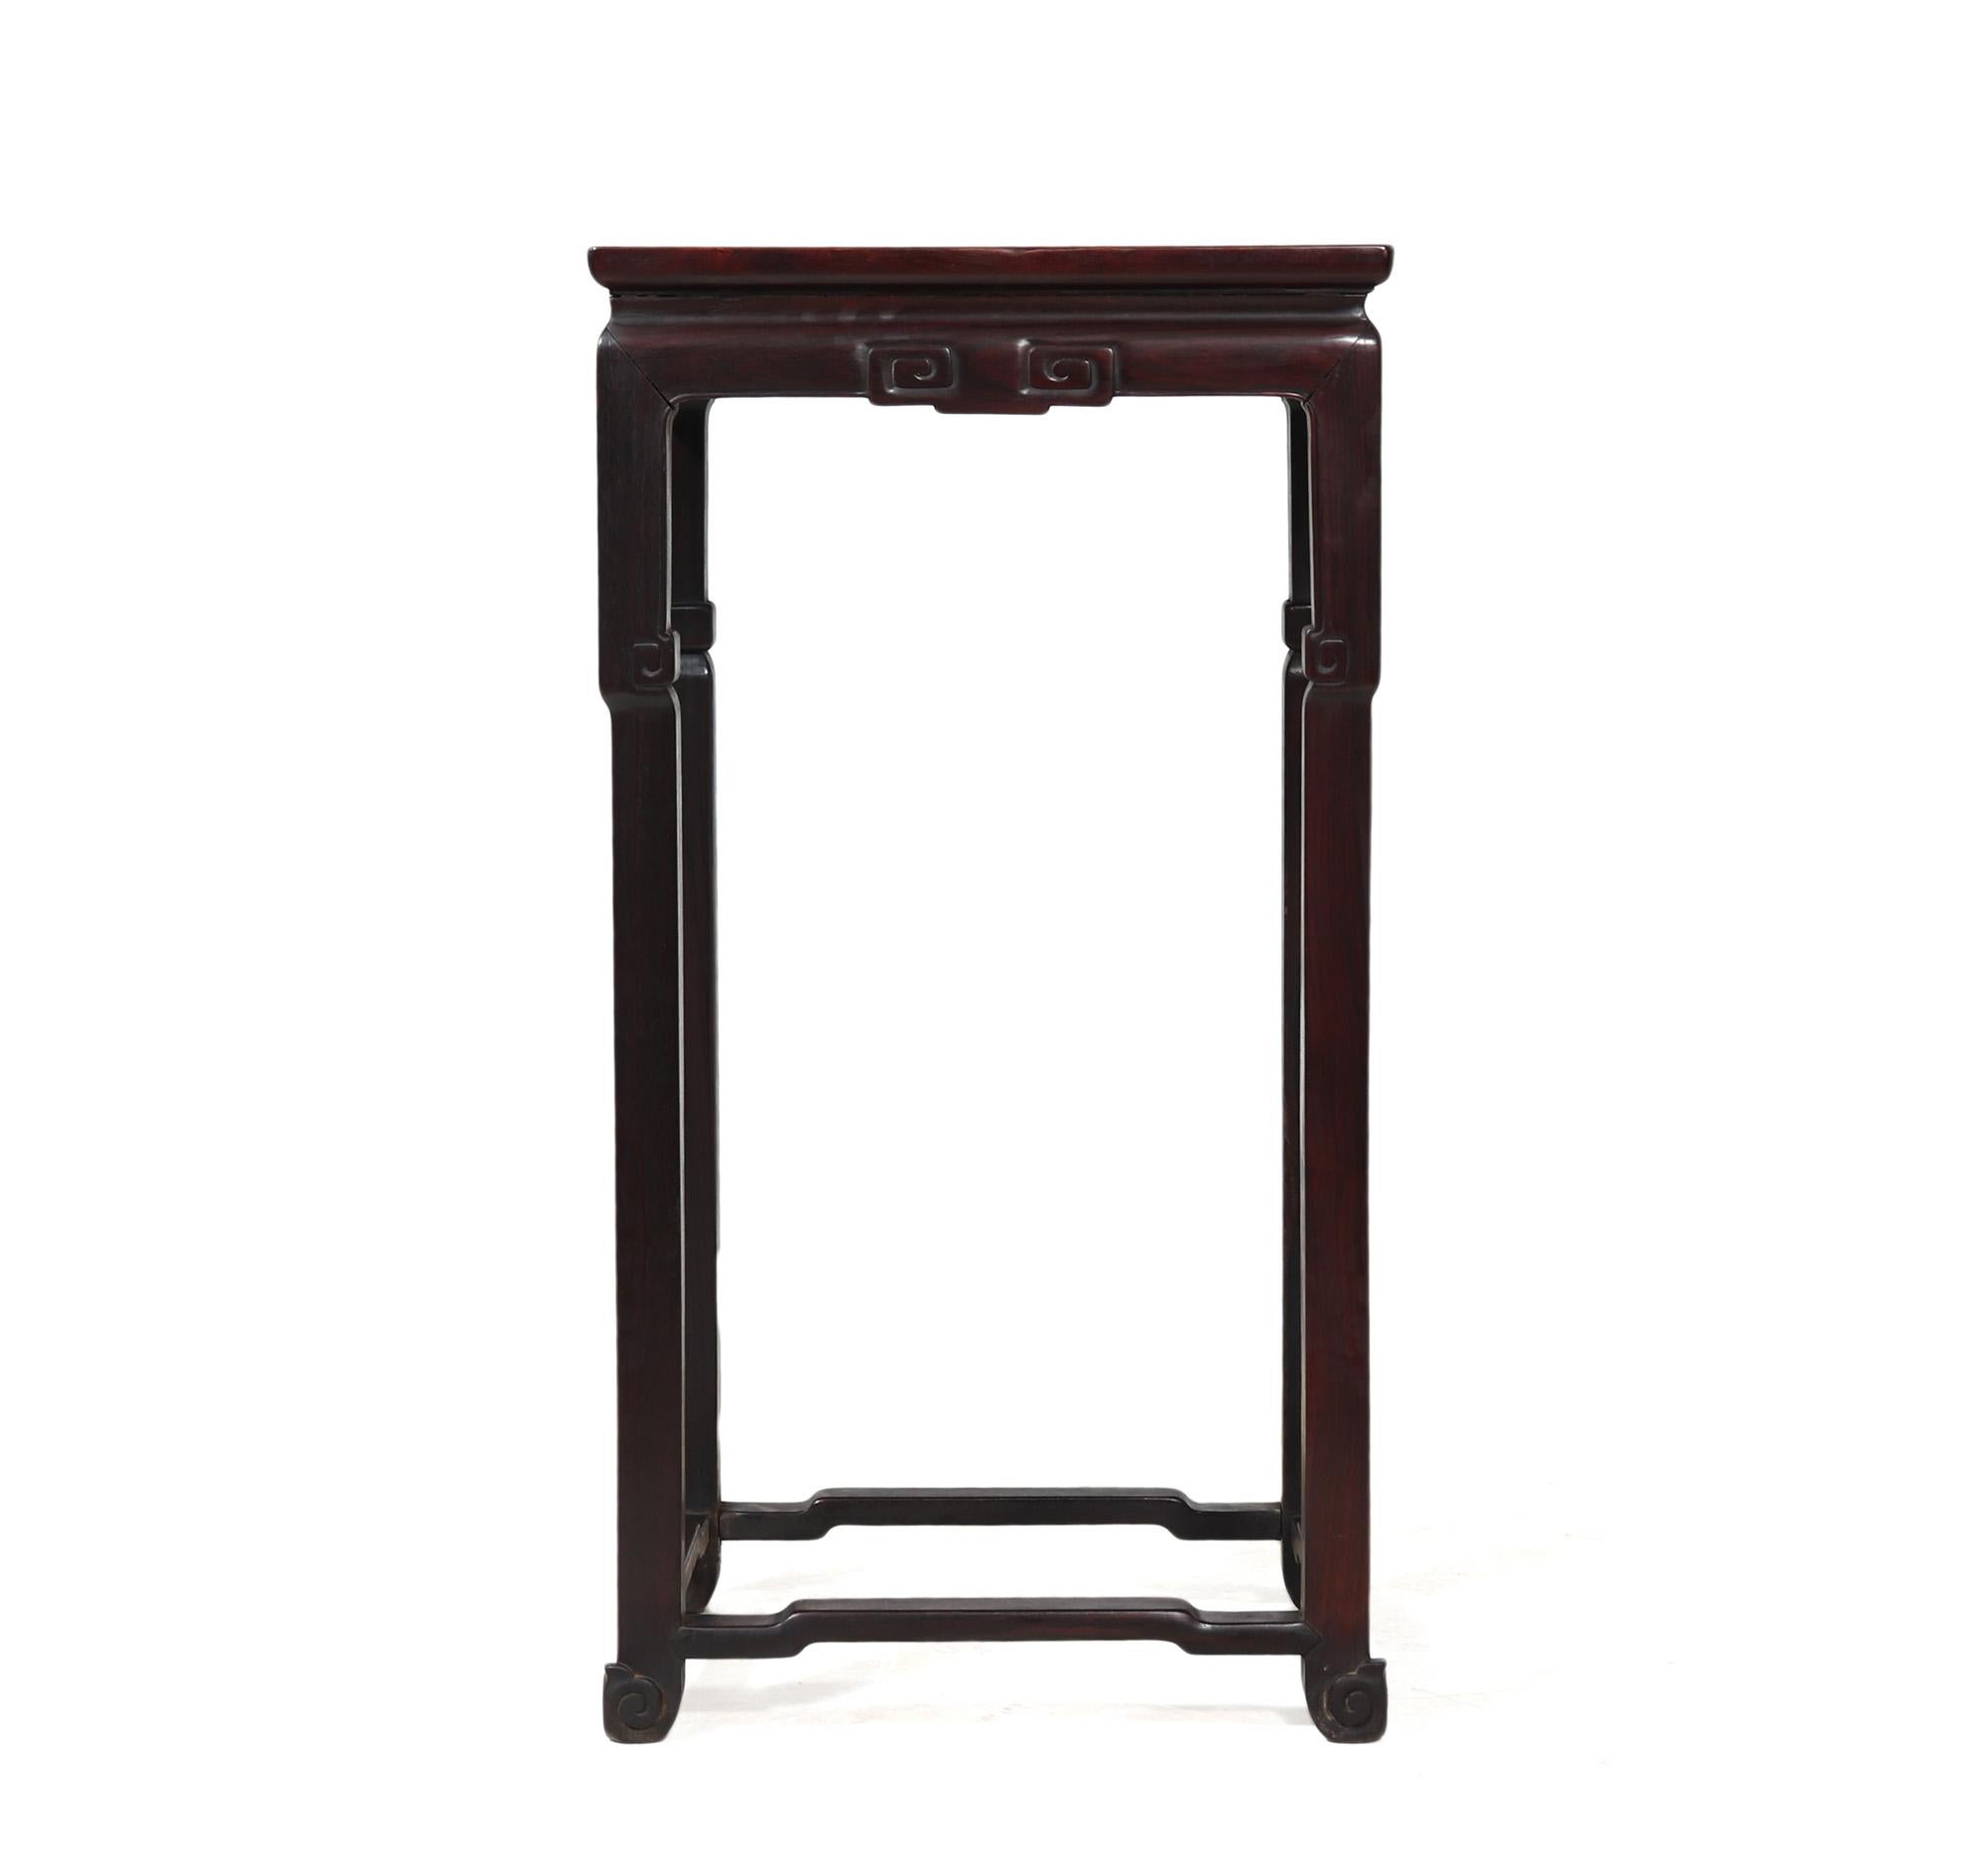 Antique Chinese Plant Stand Introducing this solid rosewood plant stand, carved to perfection in the timeless Ming style. This elegant piece features a slim line design with a waisted top and a beautifully carved skirt, adding a touch of